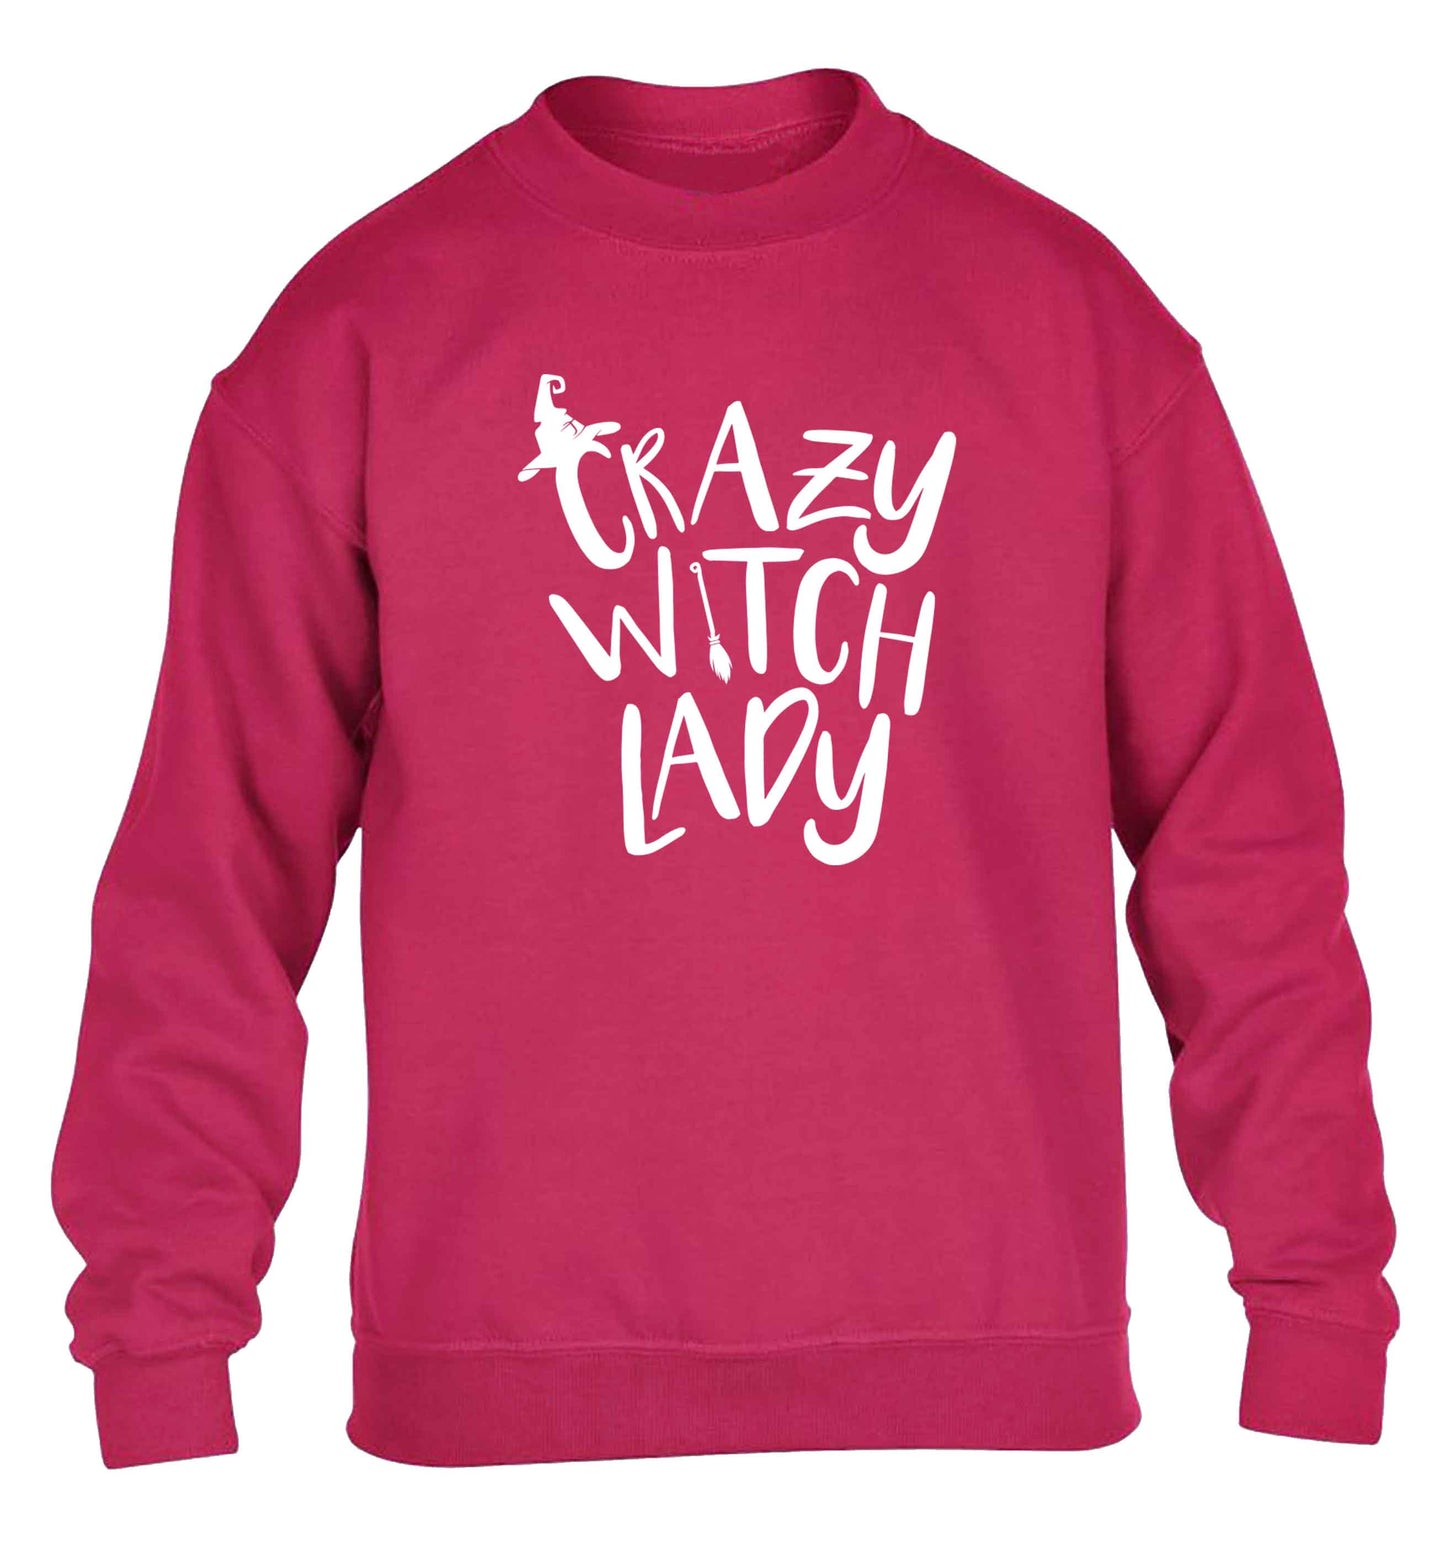 Crazy witch lady children's pink sweater 12-13 Years